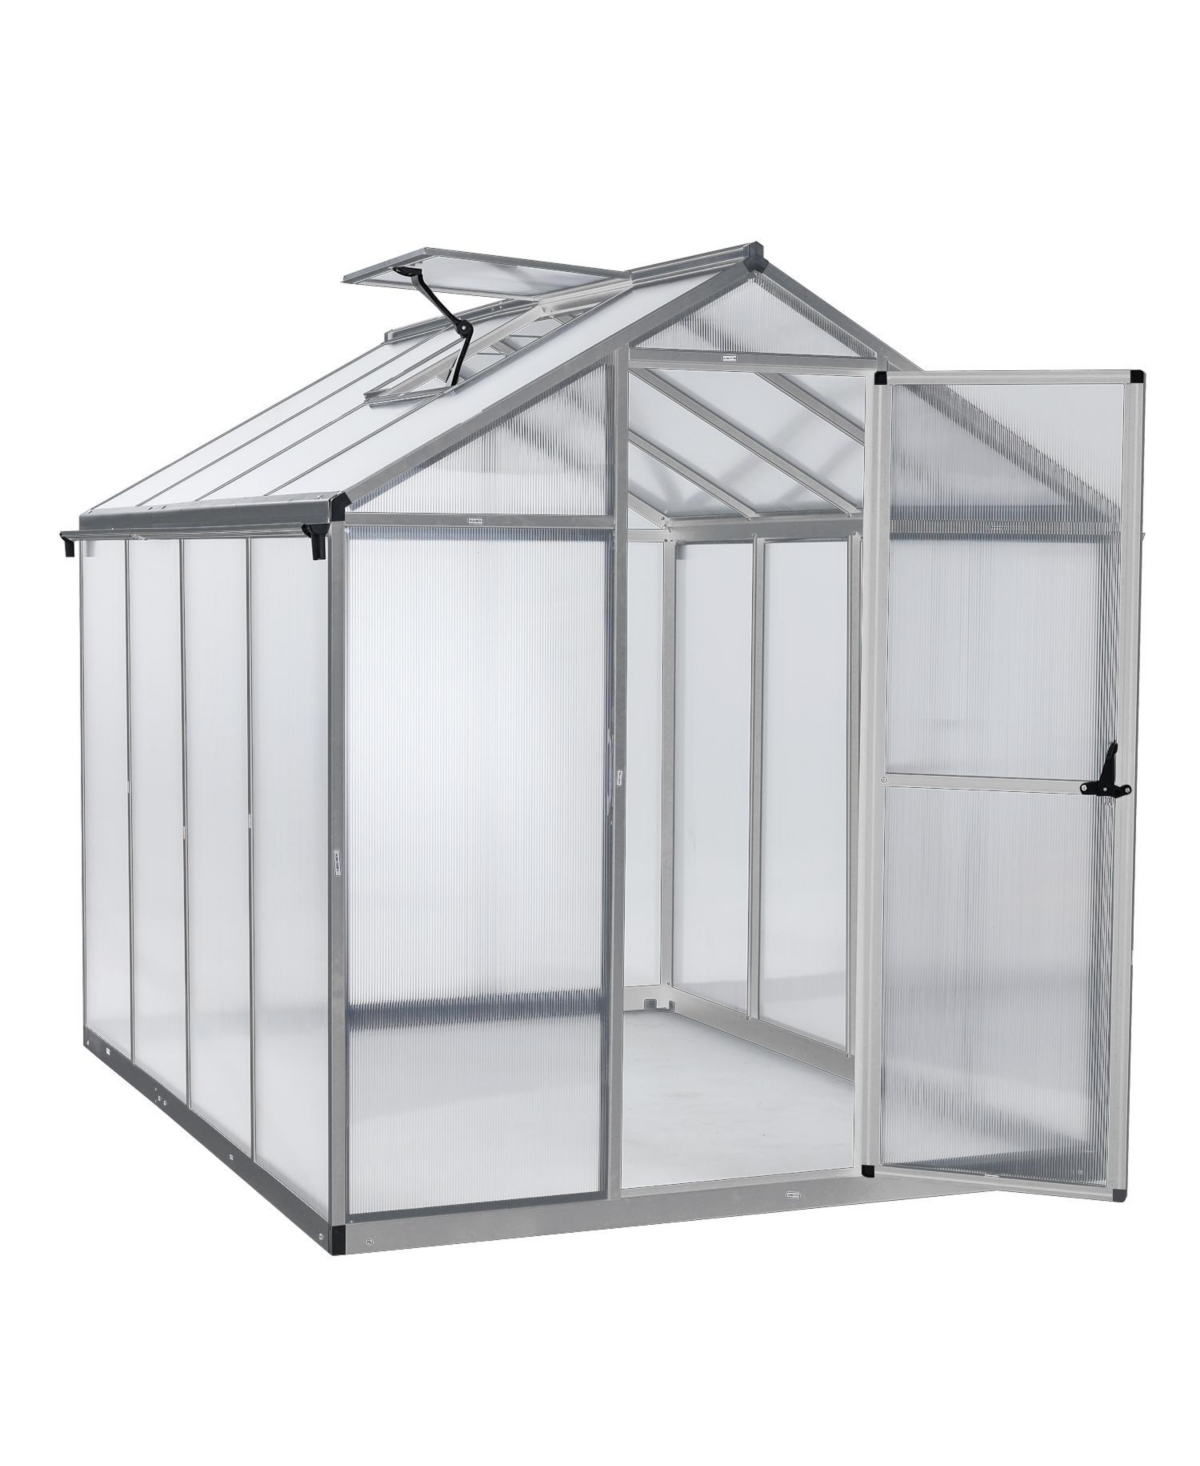 77''x77''x88'' Walk-in Greenhouse Polycarbonate Panel Hobby Greenhouses with Aluminum Frame Heavy Duty with 1 Vent Window & Lockable Door for O